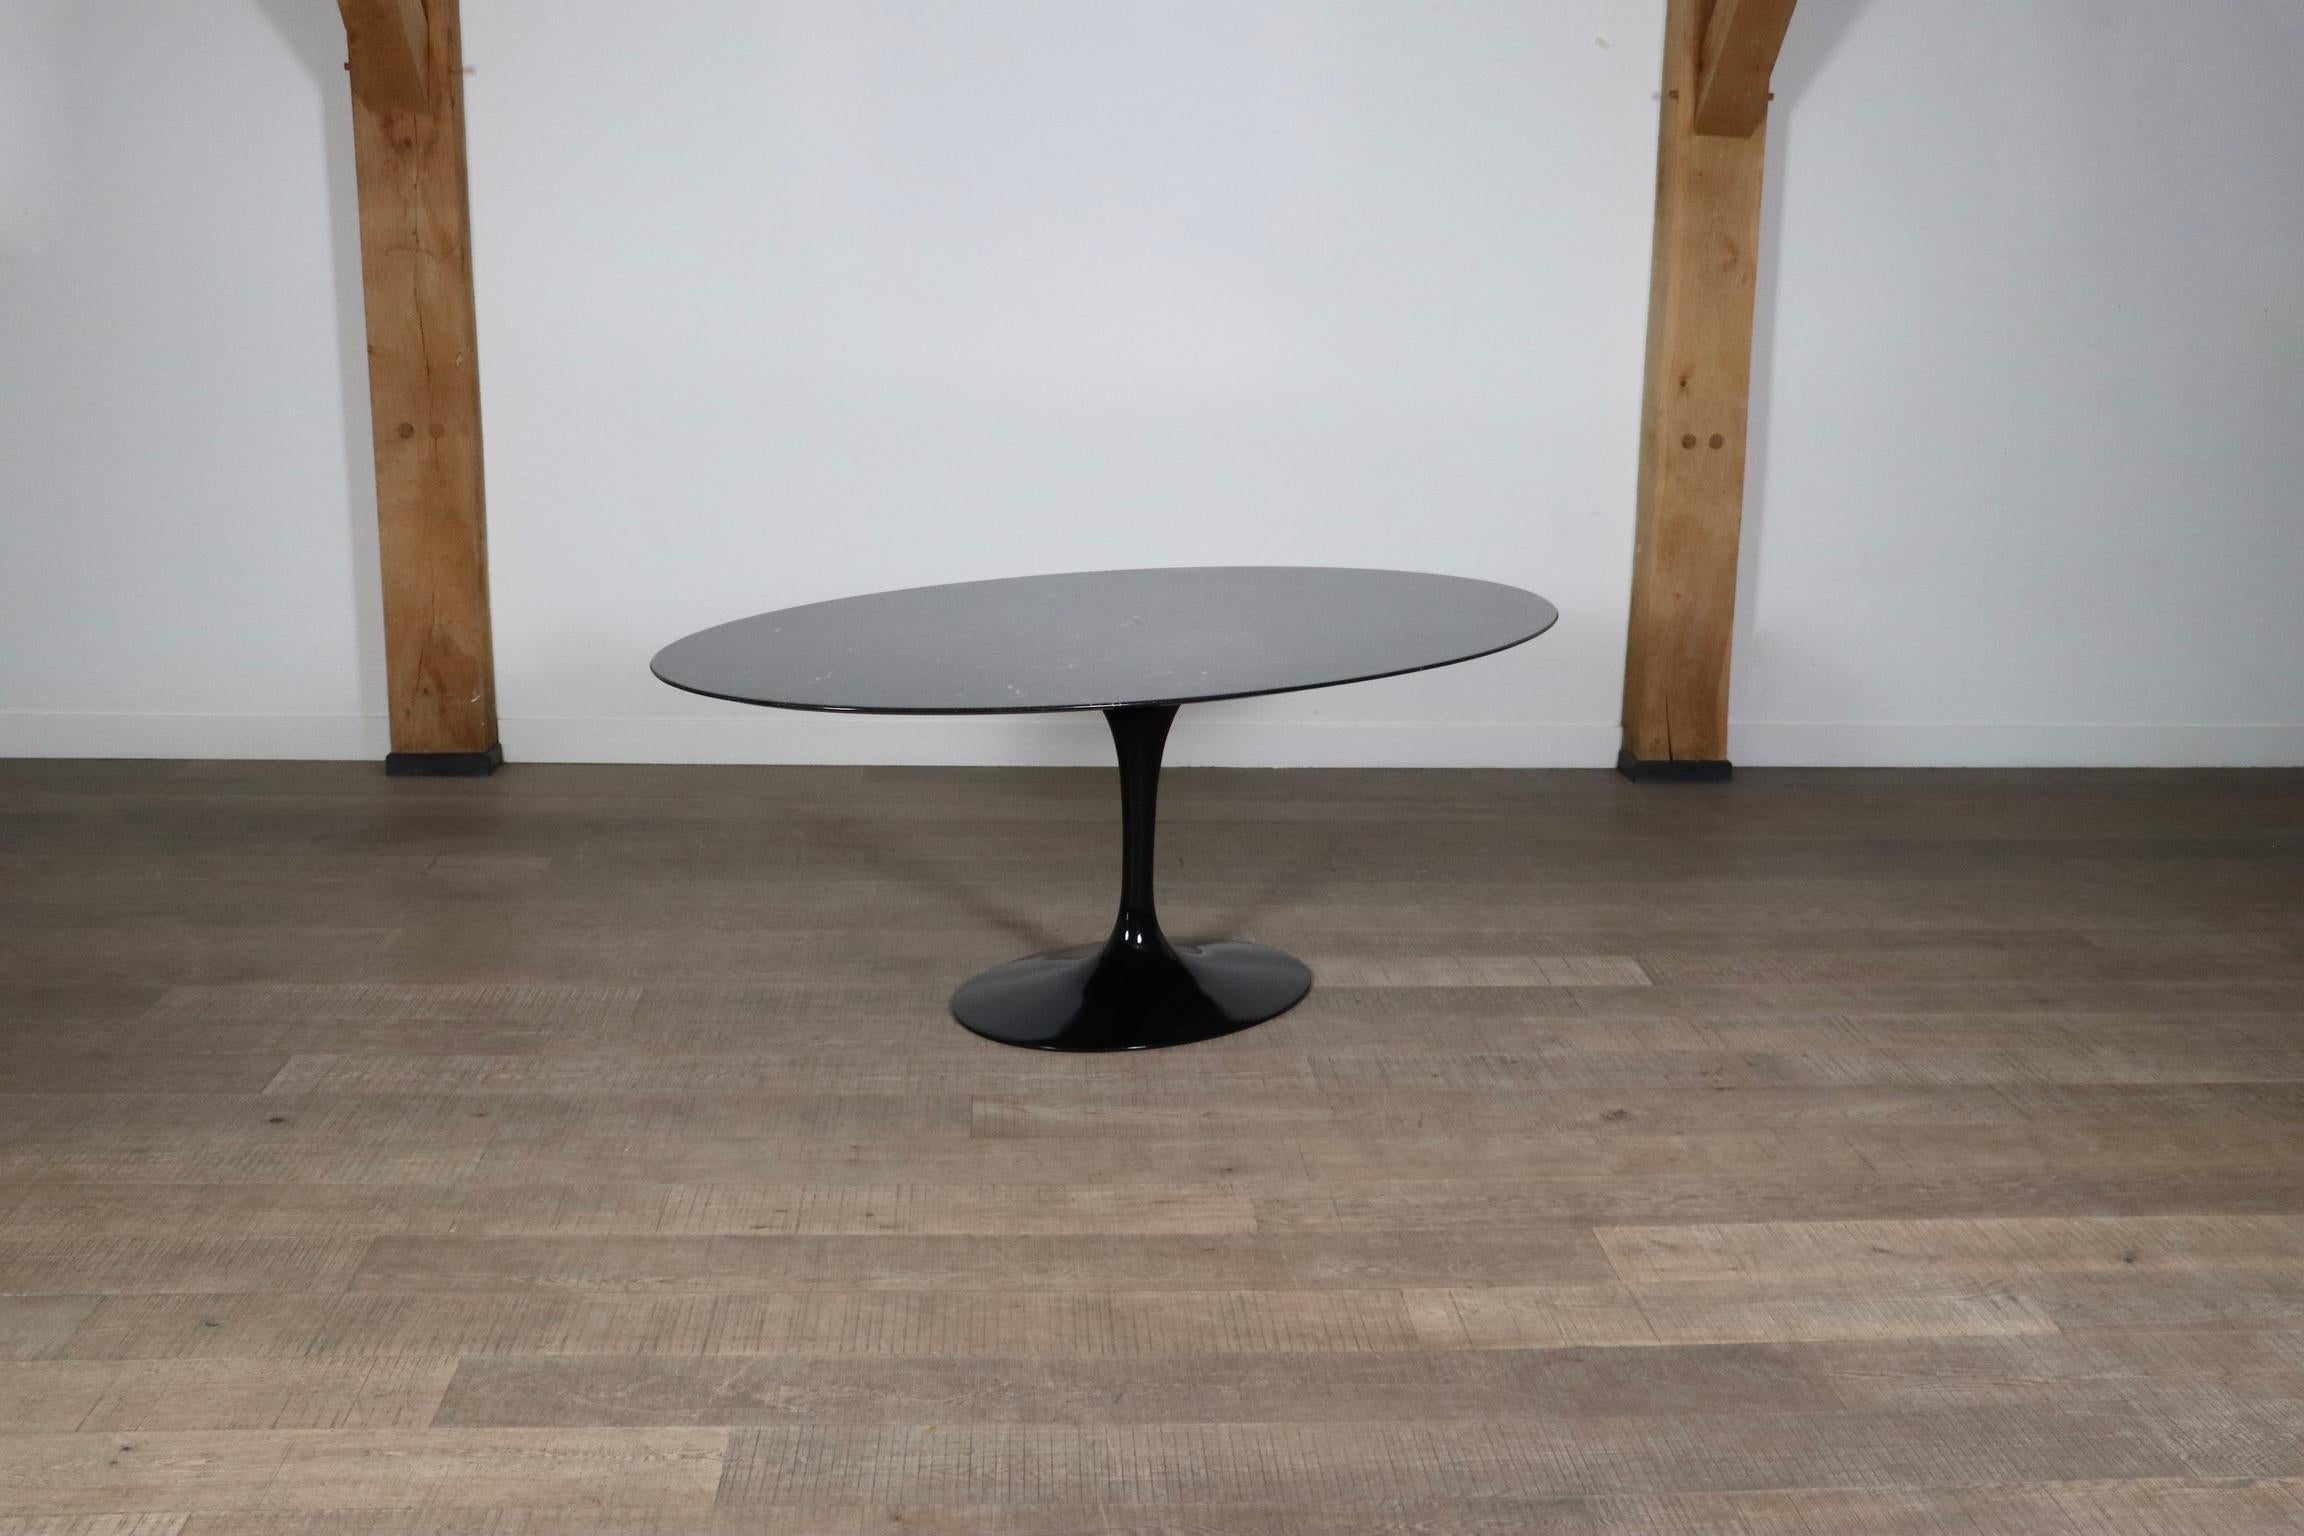 Vintage Black Marble Tulip Oval Dining Table By Eero Saarinen For Knoll, 1970s For Sale 5